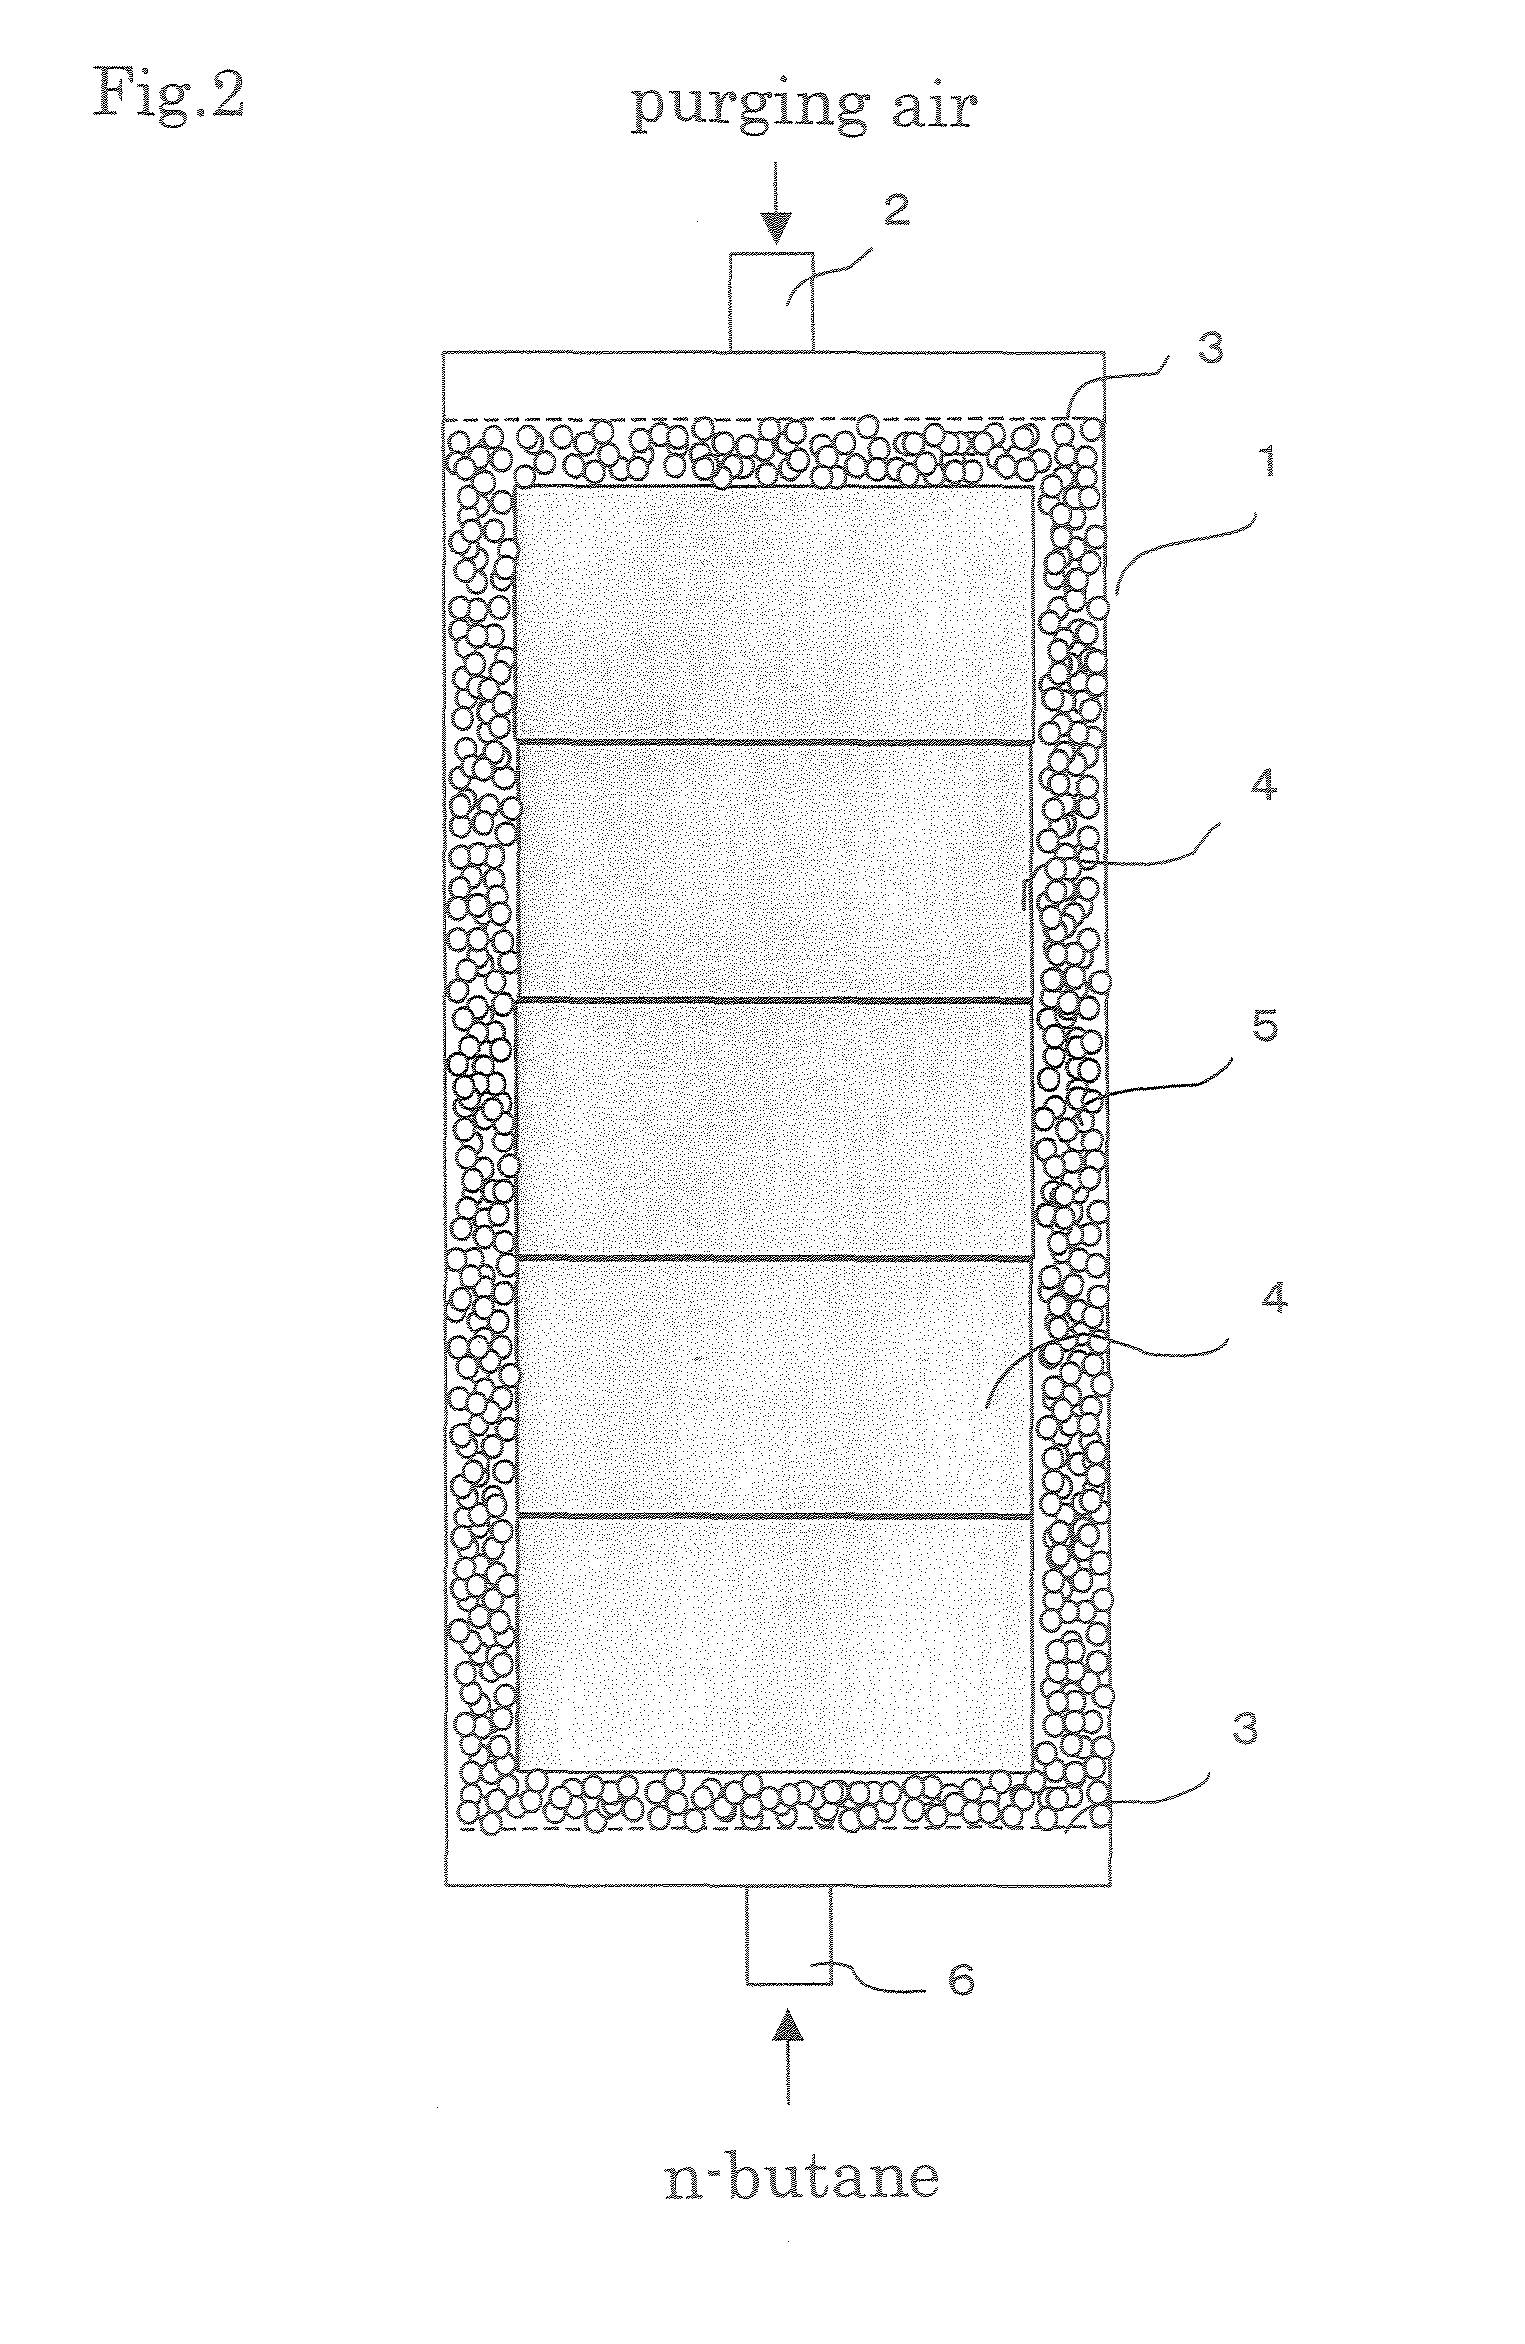 Evaporated fuel gas adsorbent, evaporated fuel gas trapping apparatus, active carbon and process for producing the same